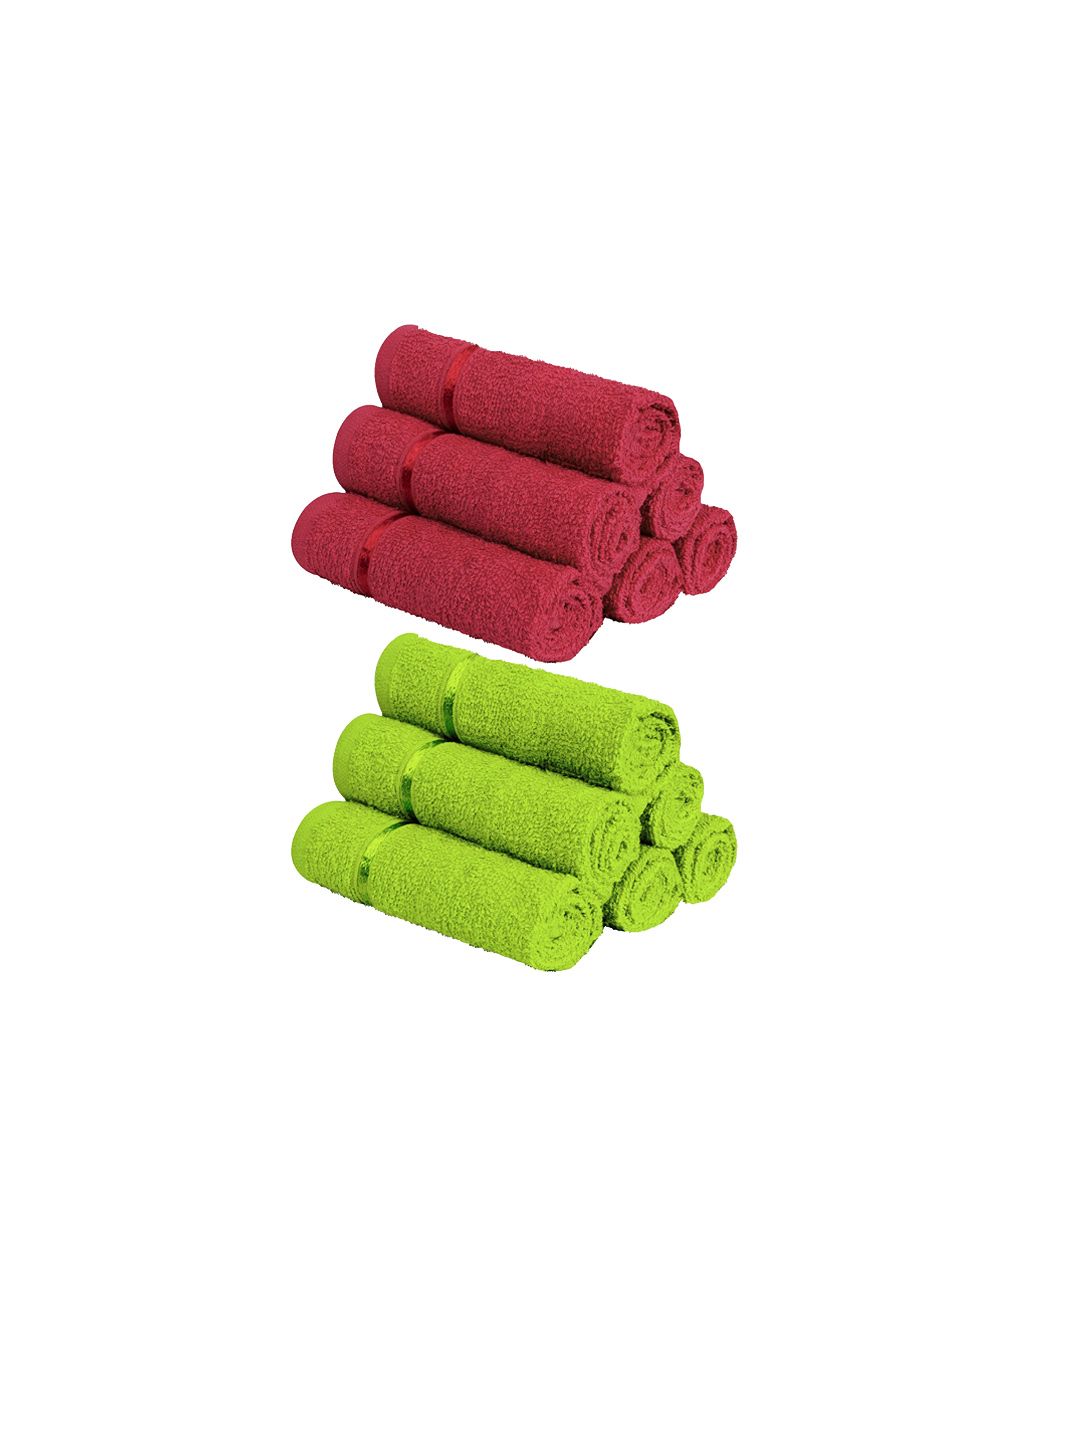 Story@home Set Of 12 Solid 450 GSM Pure Cotton Face Towels Price in India